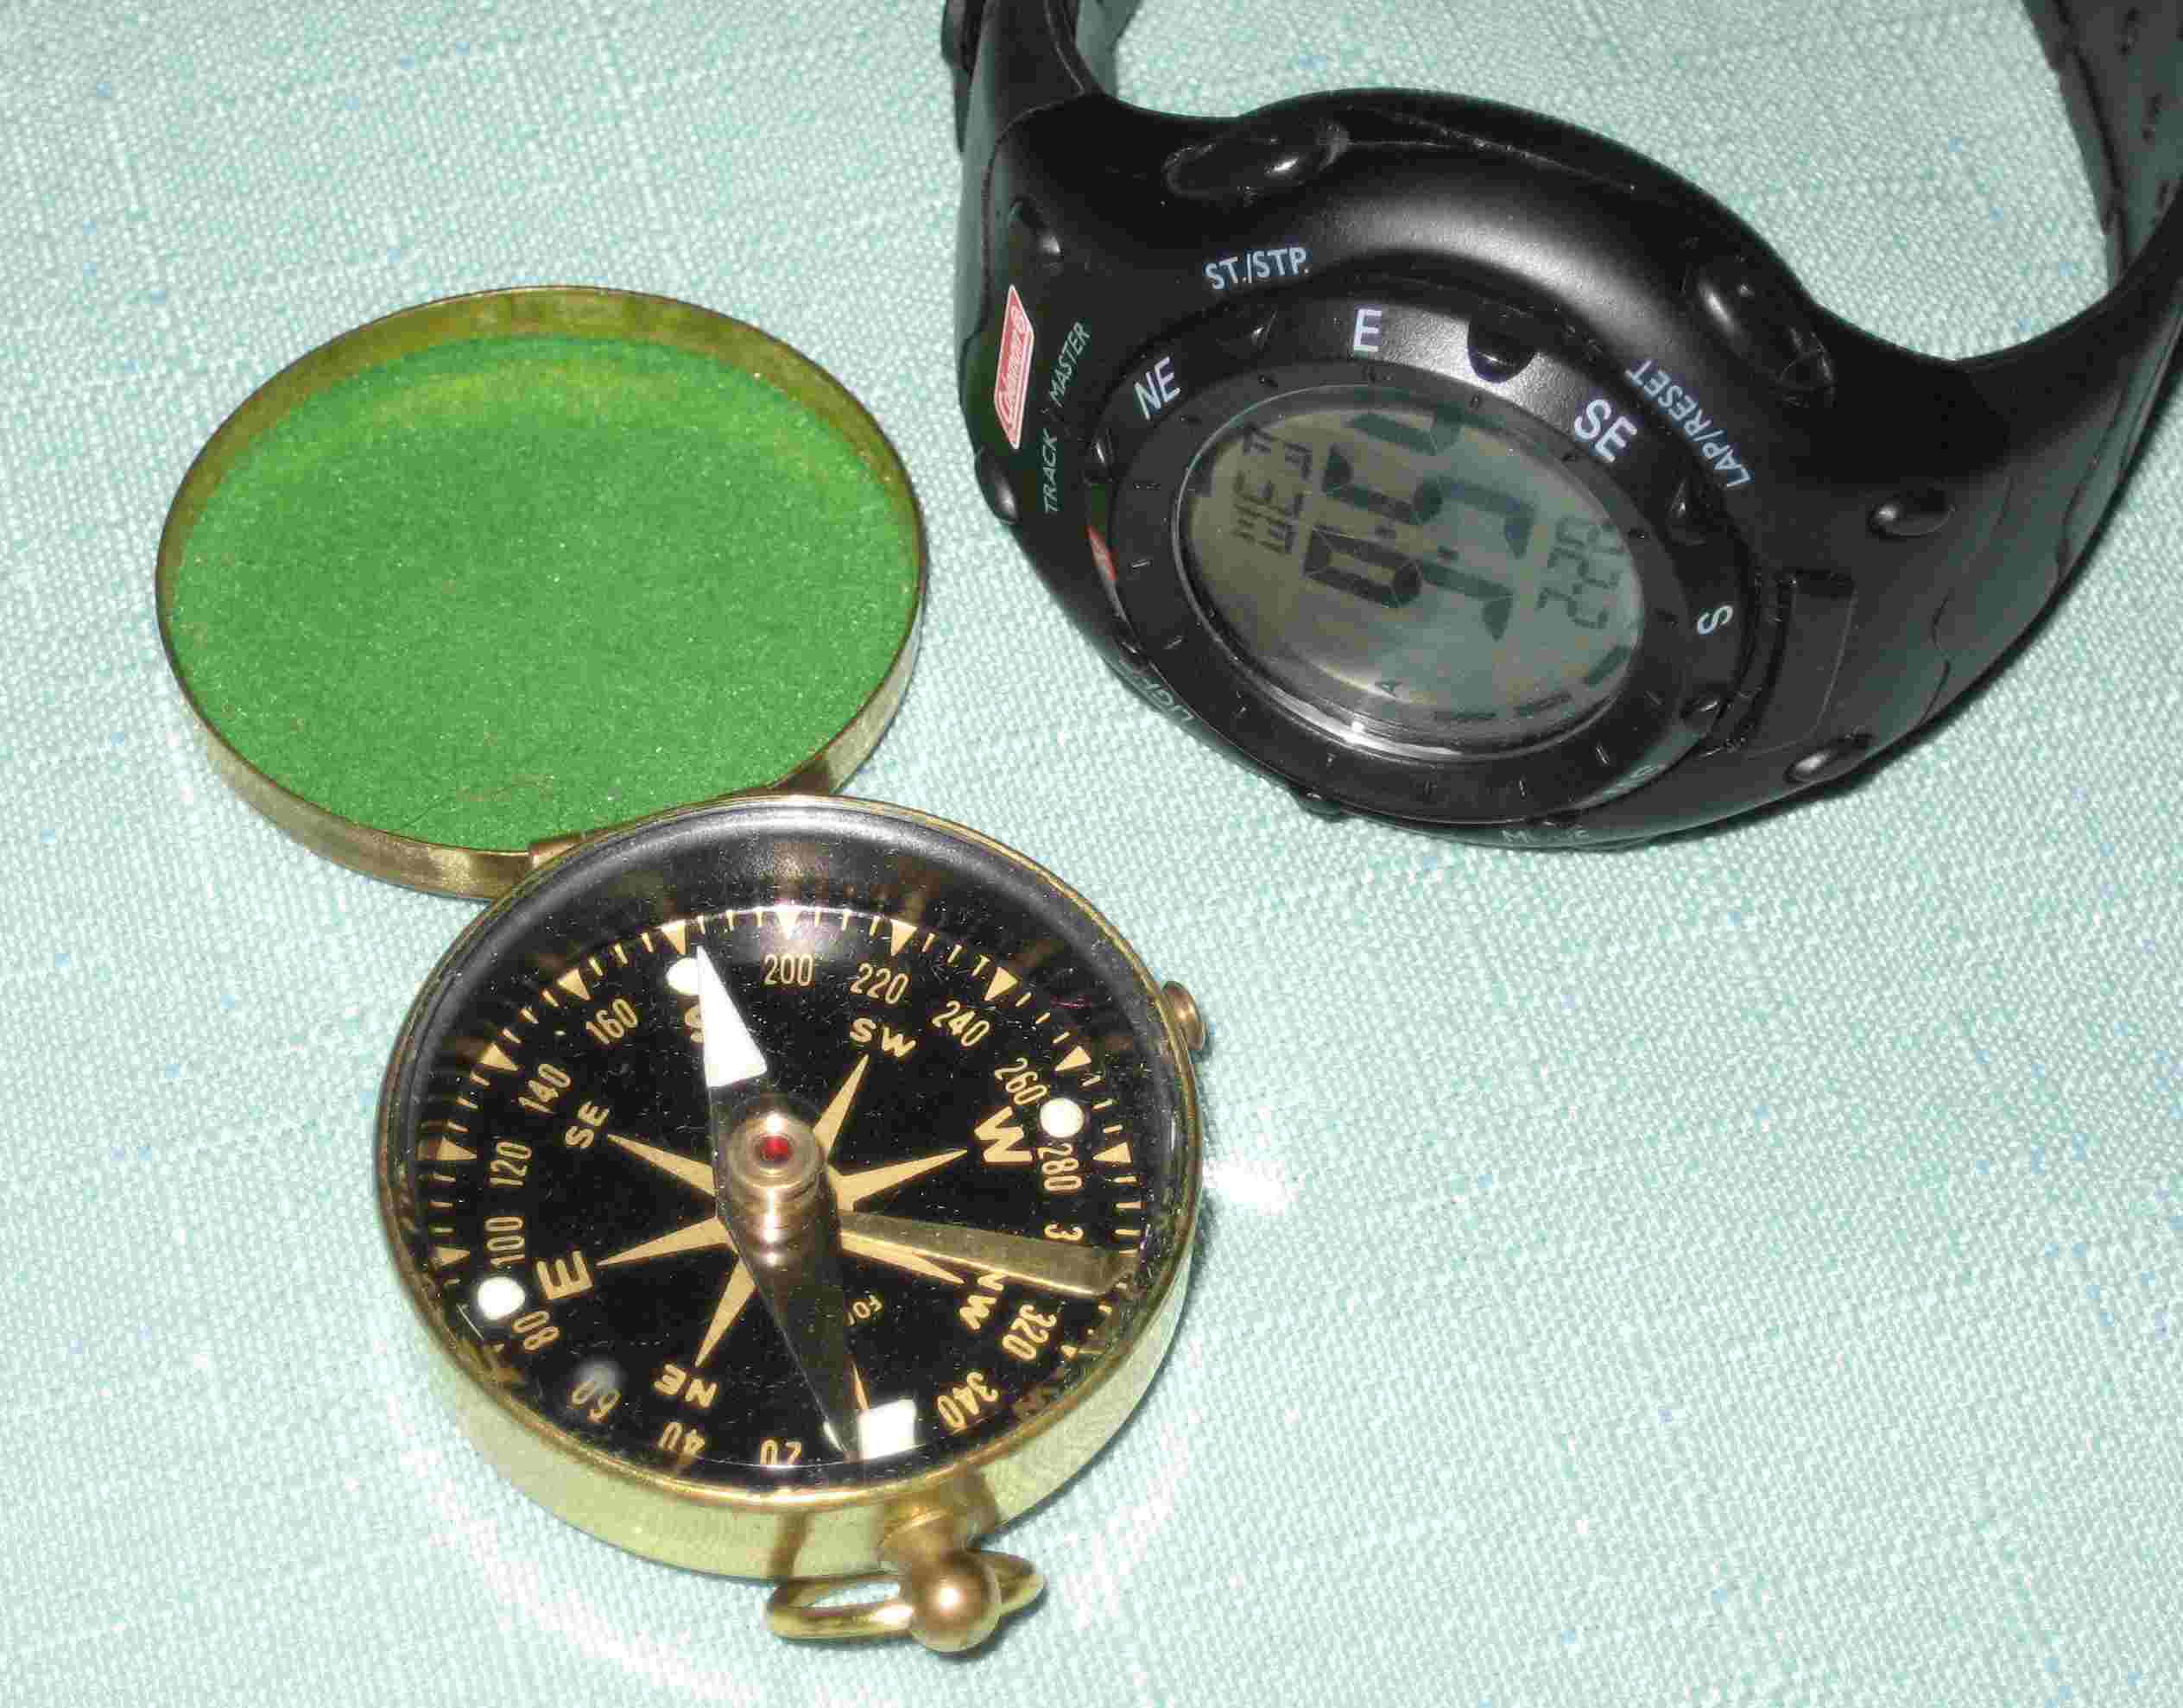 DN3 Compass and watch